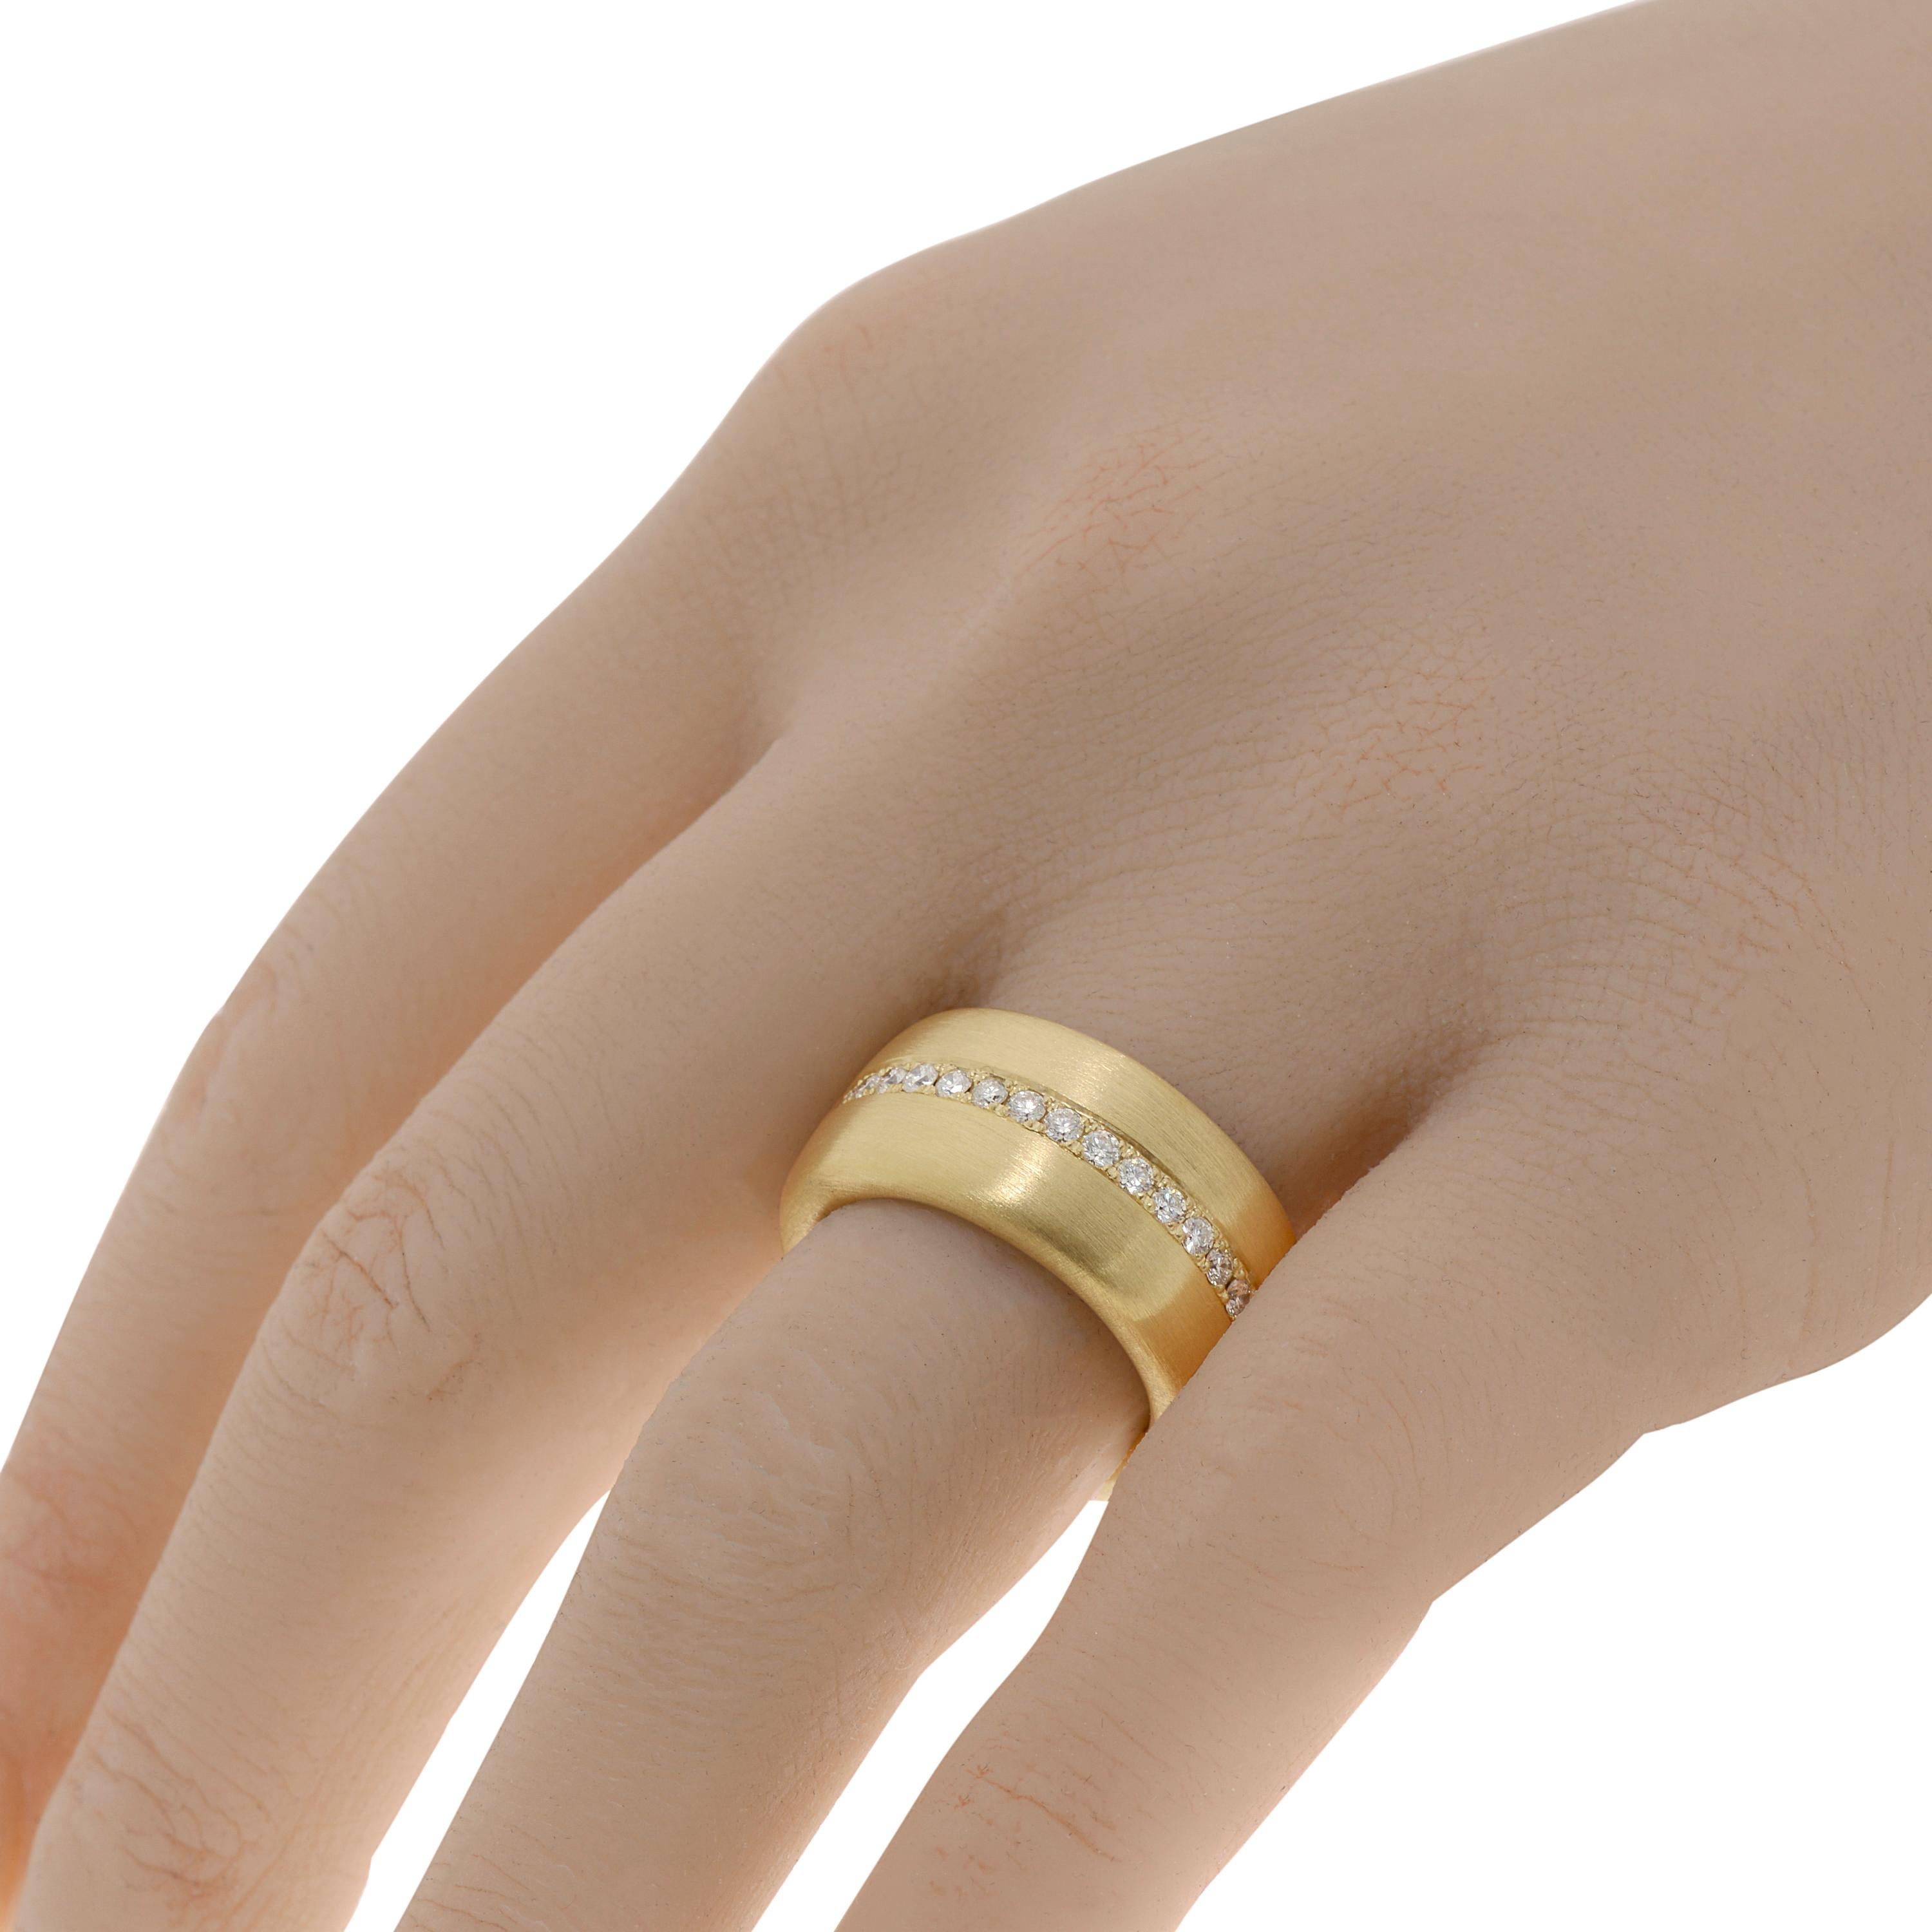 This classic Piero Milano 18K Yellow Gold Band Ring features a glistening line of diamonds 0.8ct. tw. adorning the center of a brushed 11.1mm Yellow Gold band. The ring size is 7.25 (55.1). The Band Width is 11.2mm. The Weight is 13.6g.
